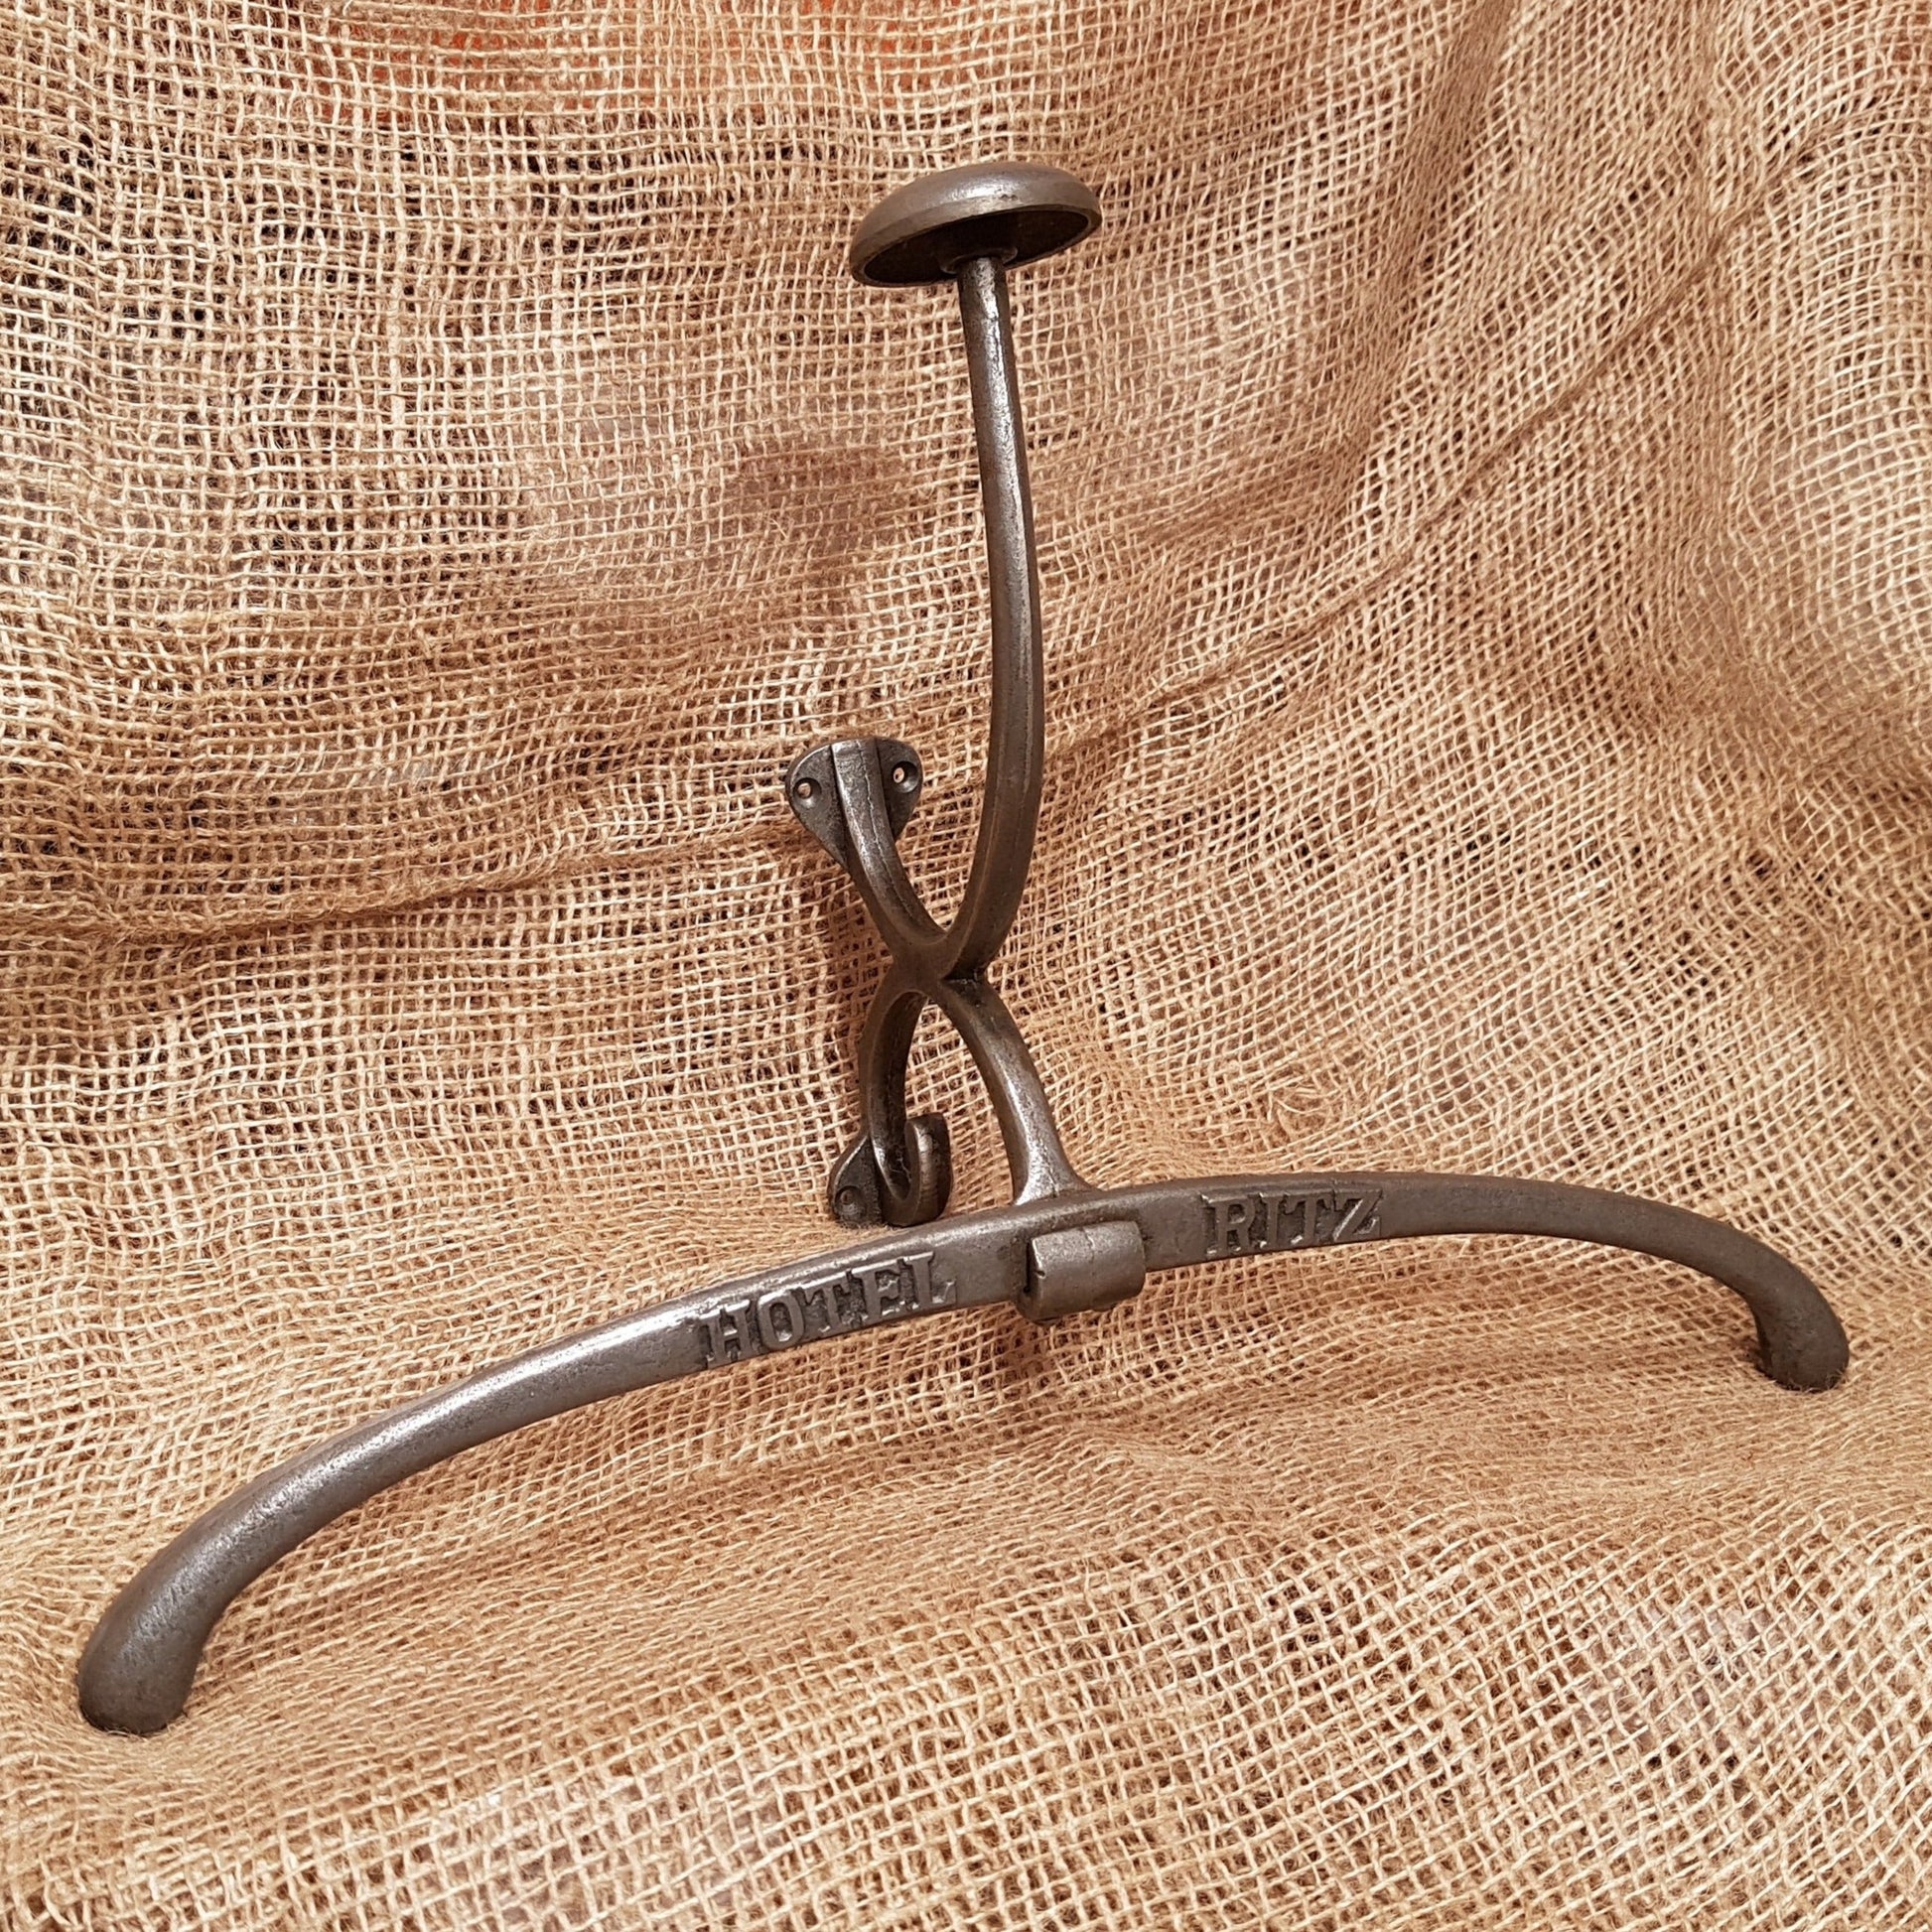 Jacket Hanger - Hotel Ritz - Spearhead Collection - Hat and Coat Hooks - Hangers, Hat and Coat Hooks, Home Decor, Hooks, Hotel, Interior Decor, Made in England, Victorian